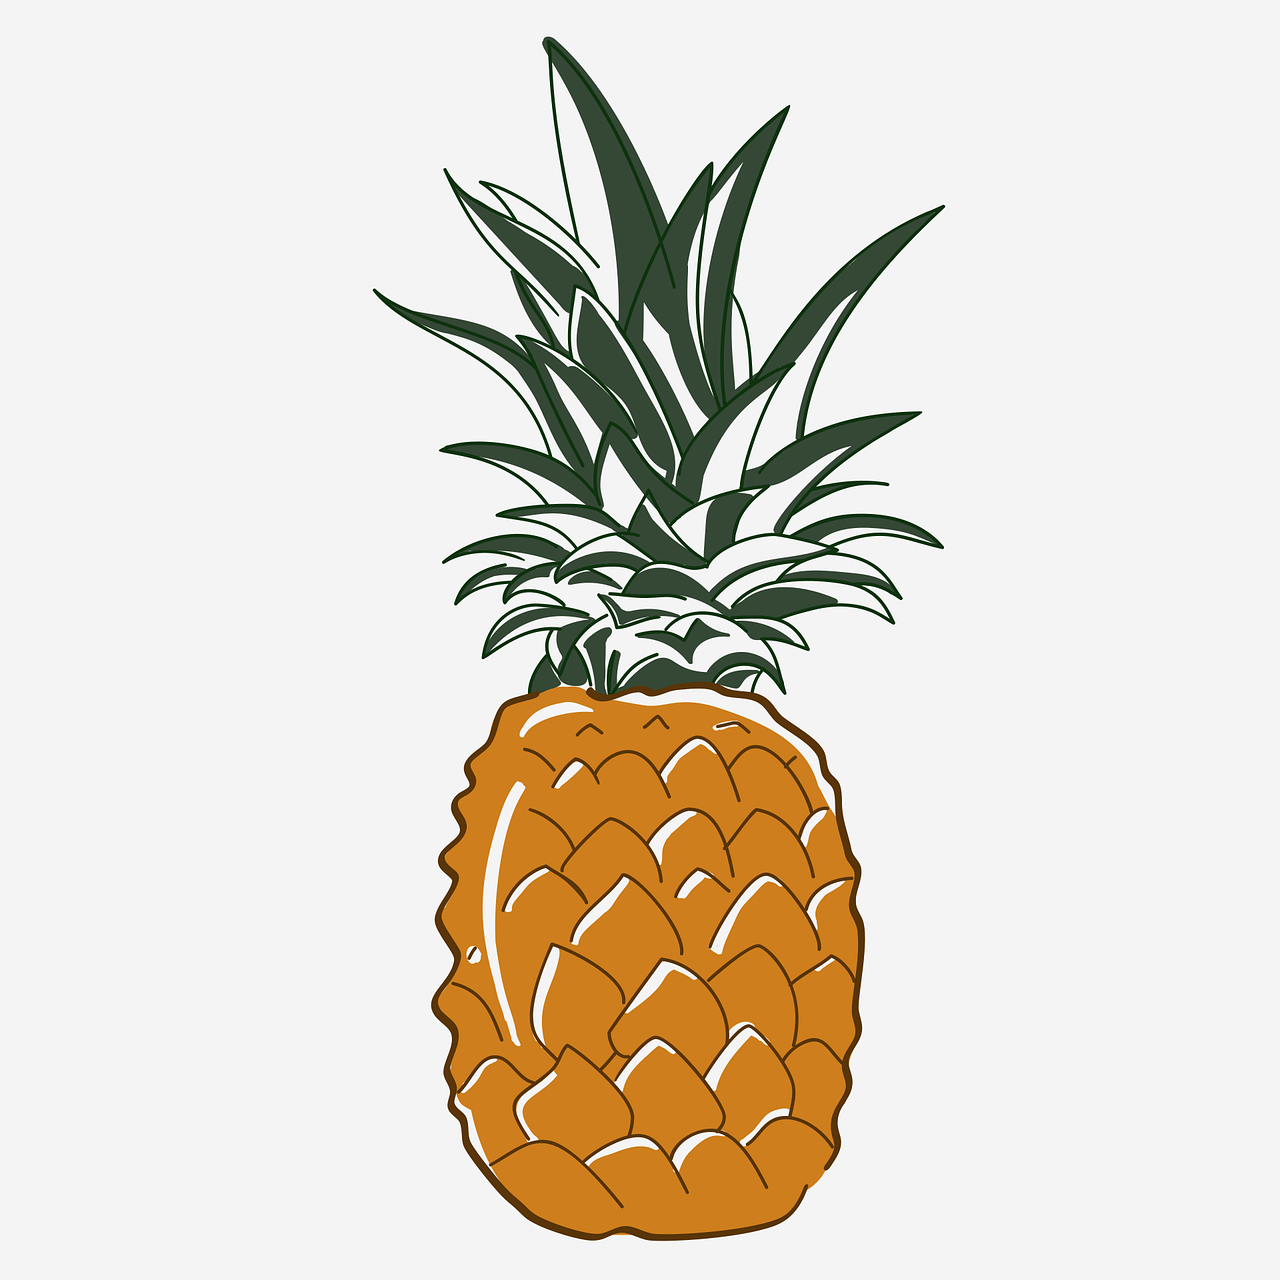 a drawing of a pineapple on a white background, pop art, flat cel shaded, colored woodcut, view from bottom to top, on a gray background